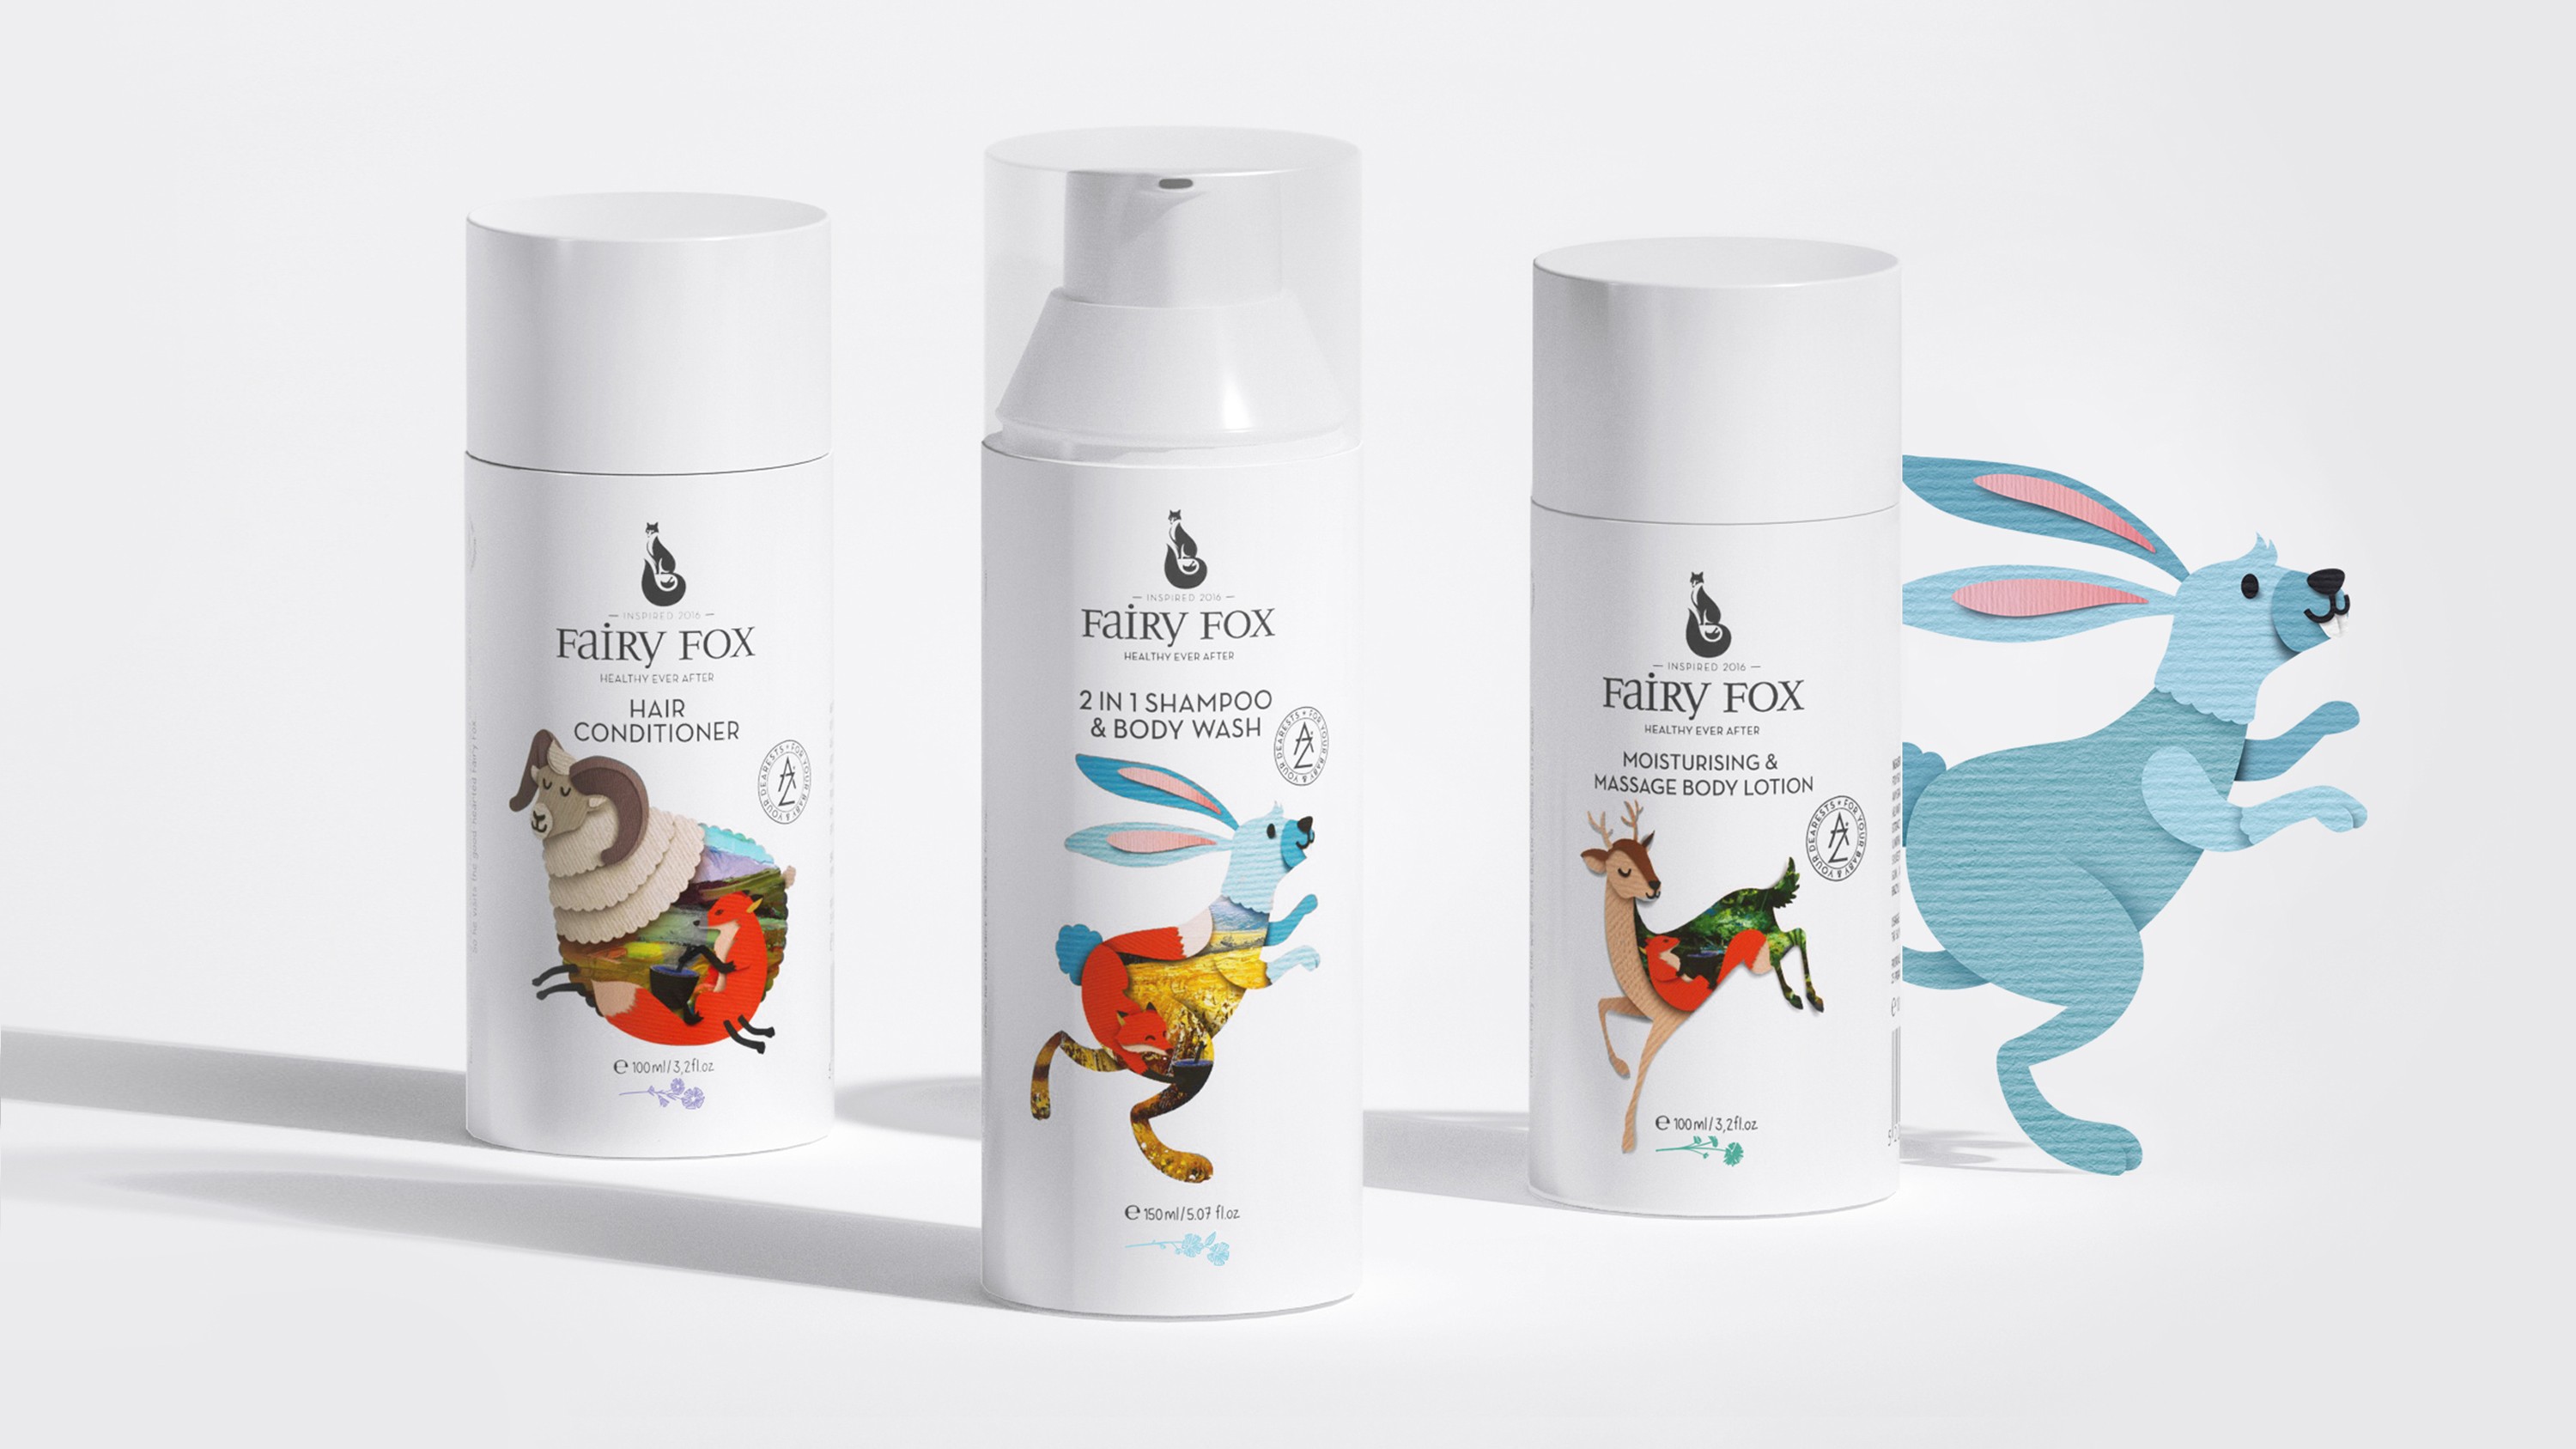 Illustration and Packaging Design for The Fairy Fox Skincare for Children, Inspired by Mother Nature